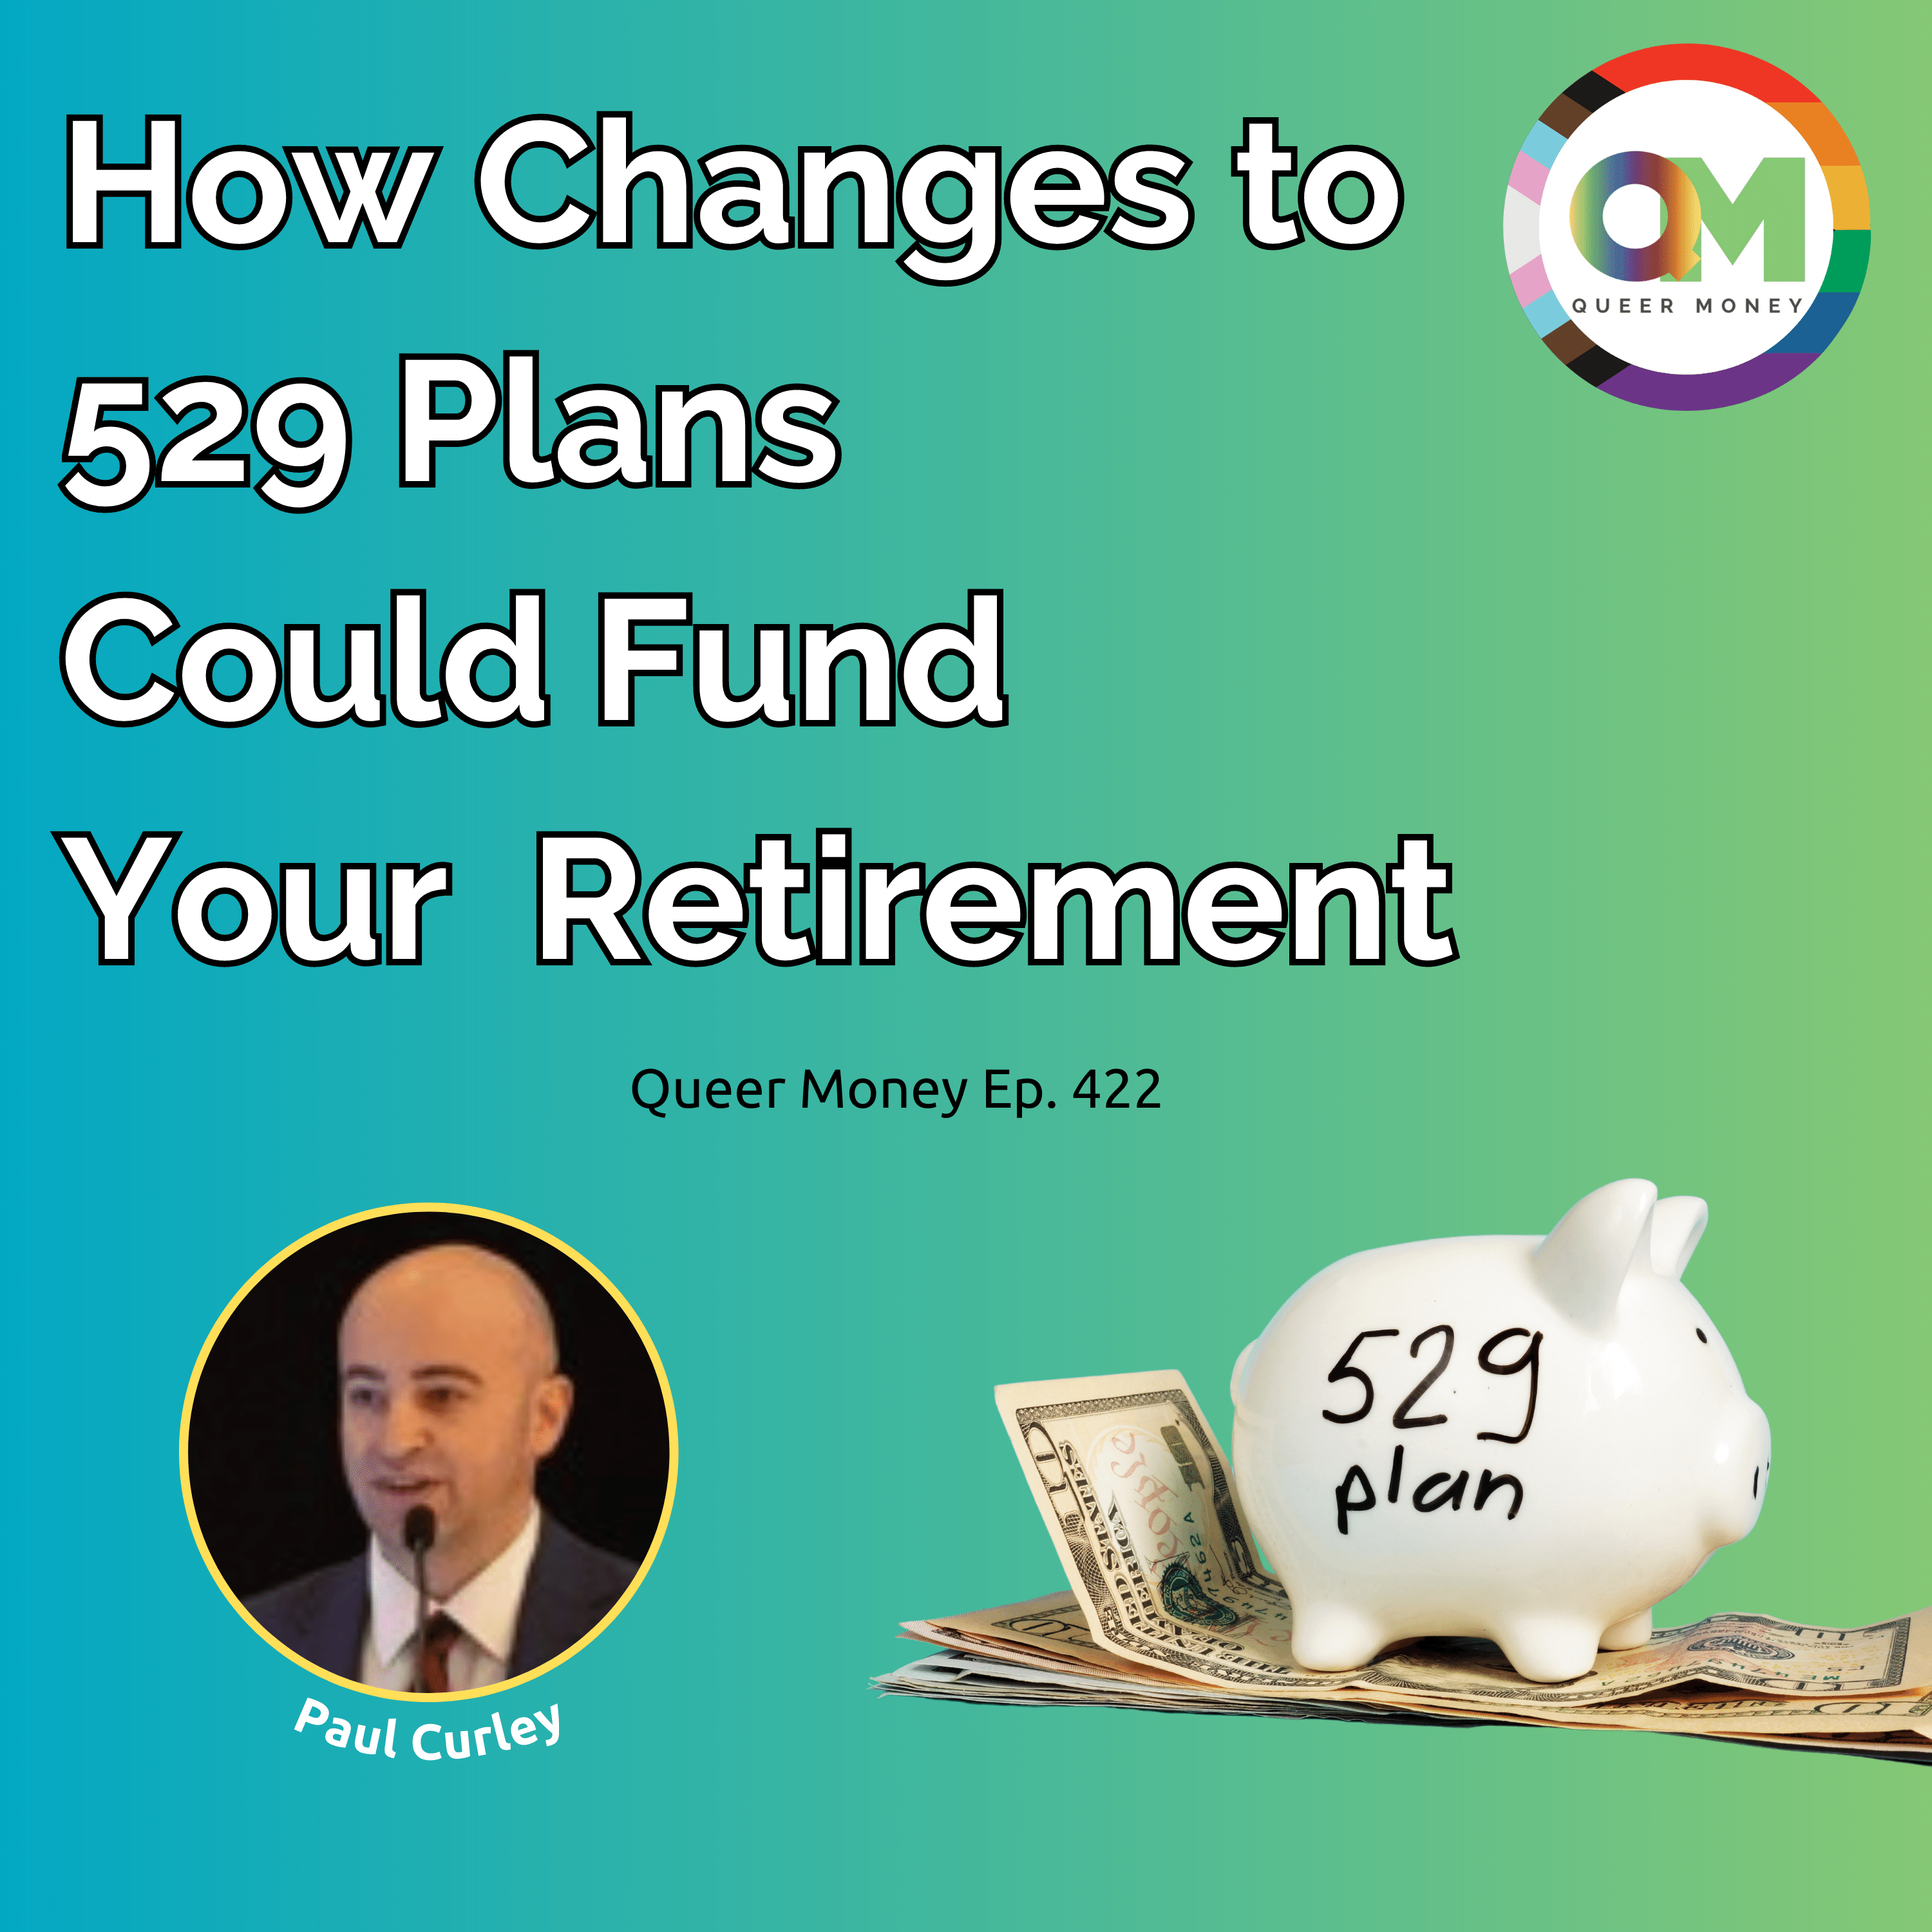 How Changes to 529 Plans Could Fund Your Retirement | Queer Money Ep. 422